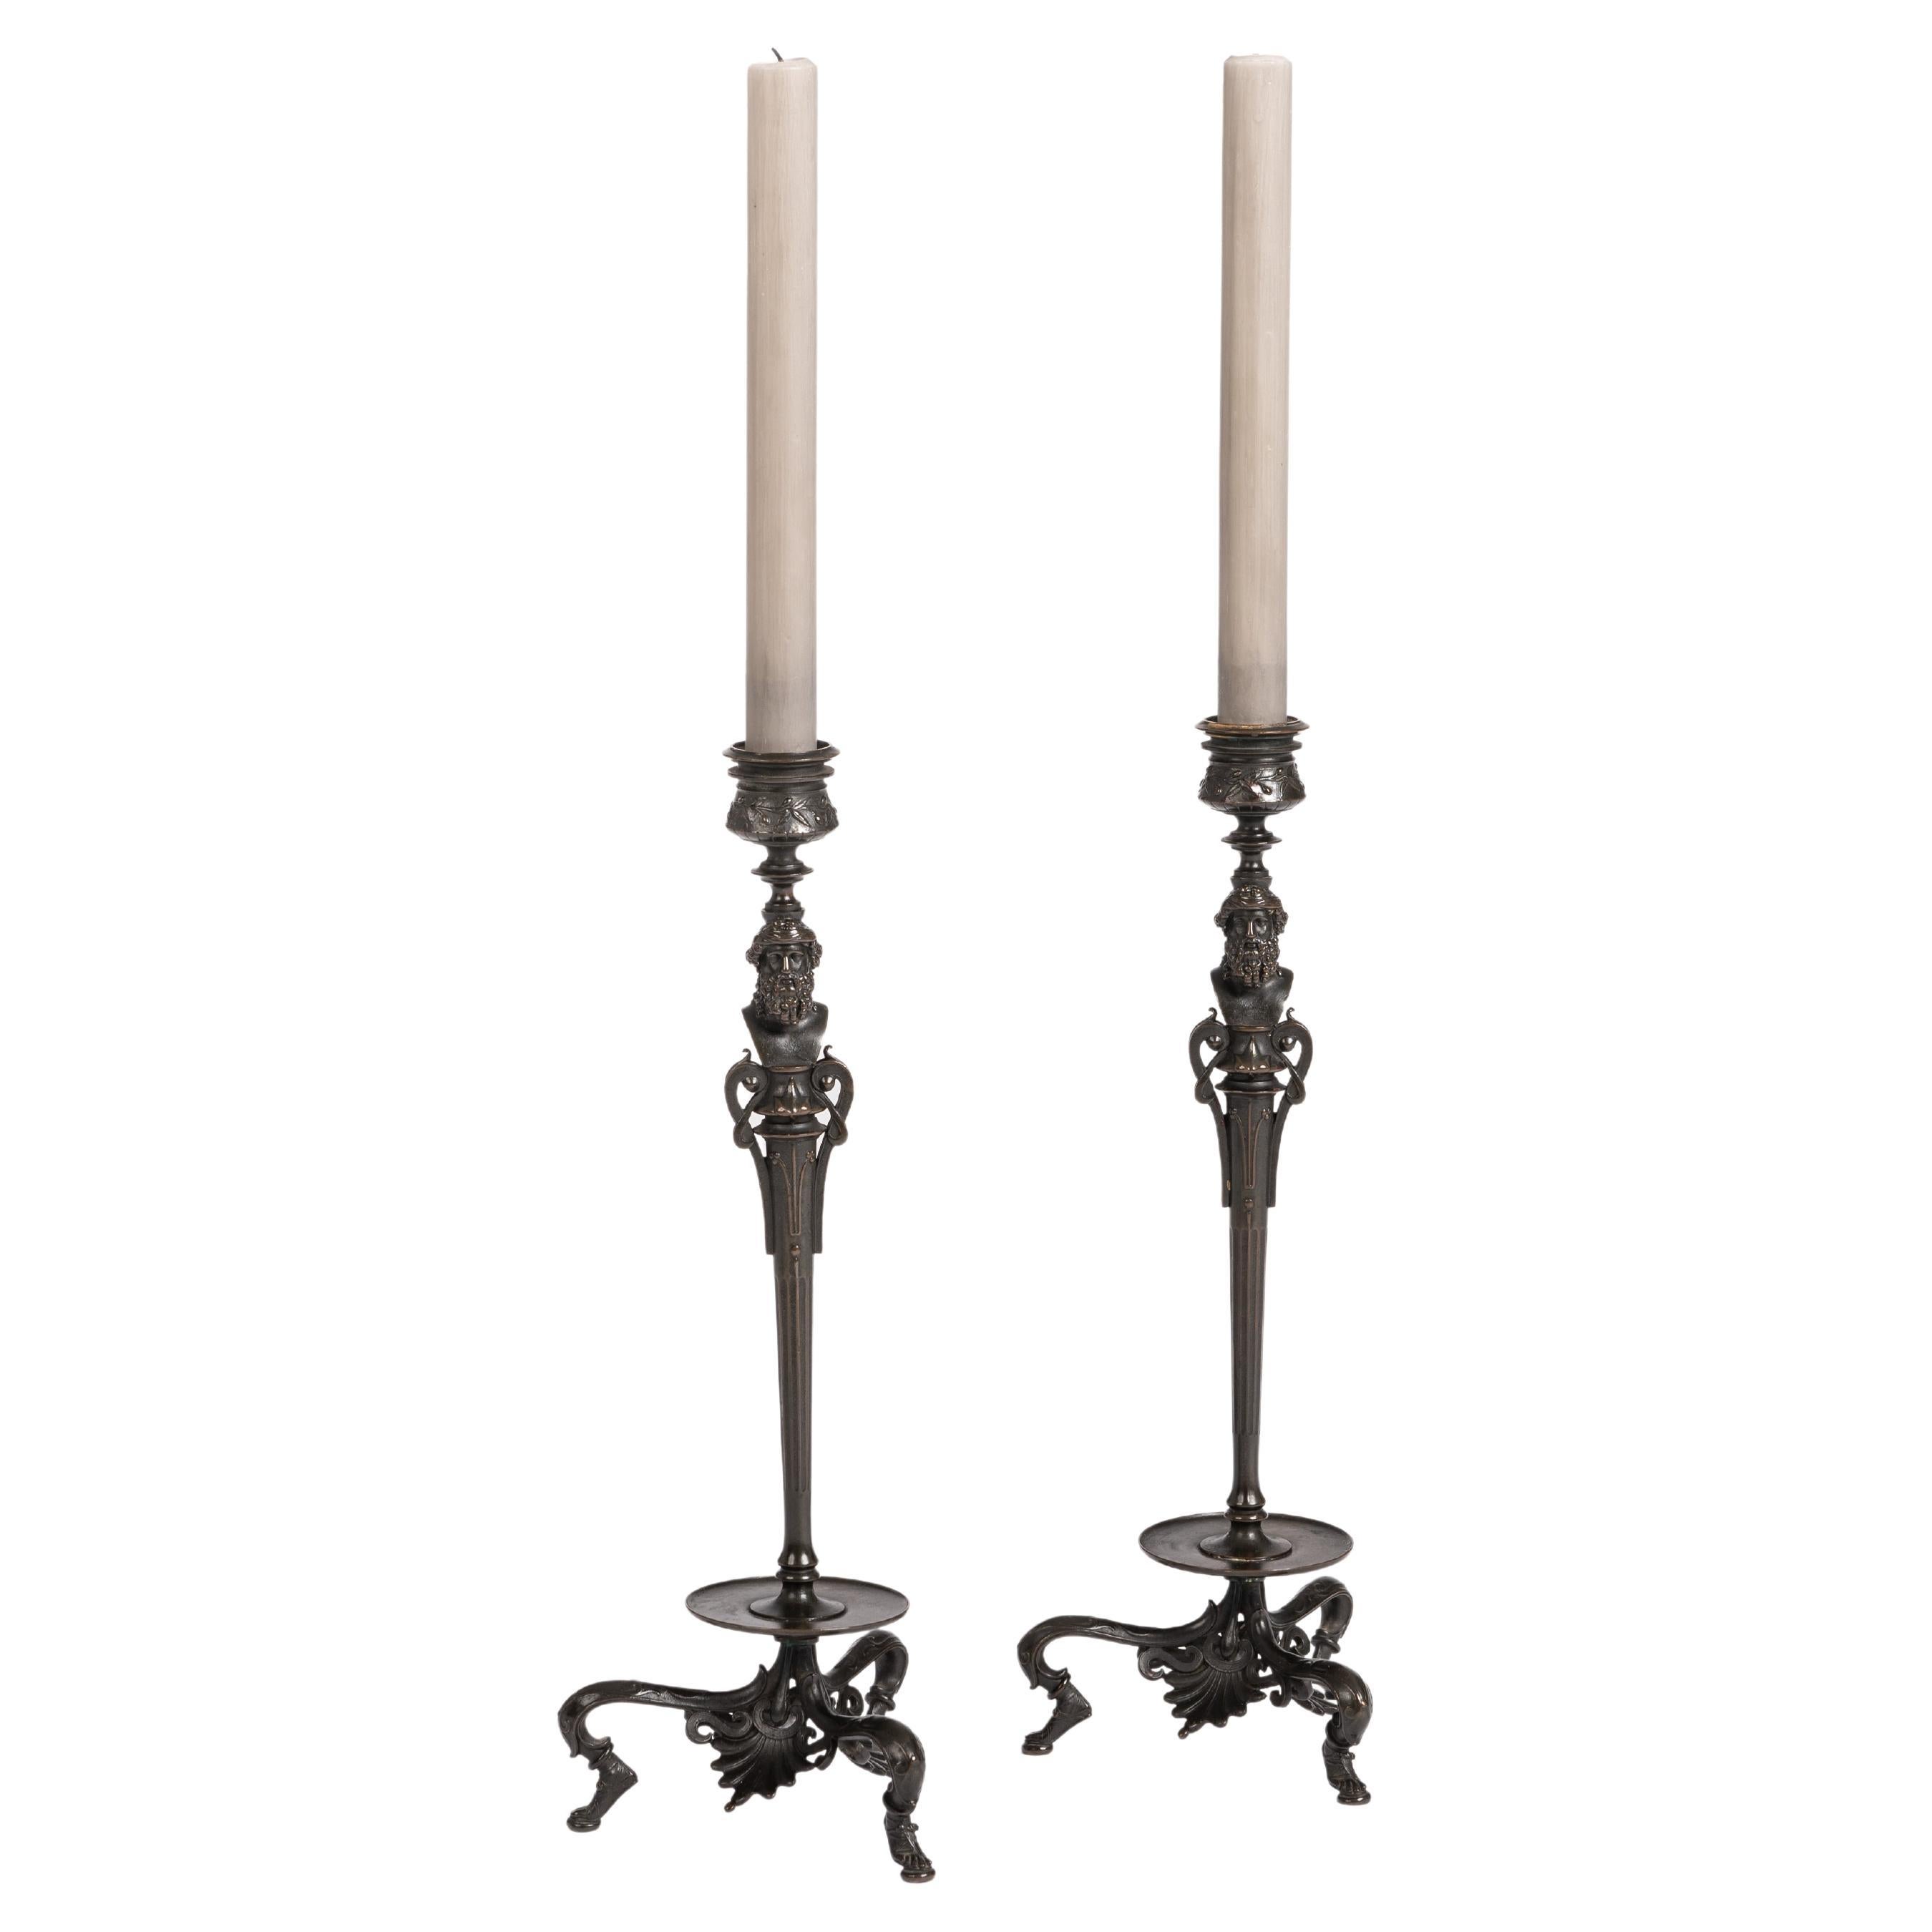 Pair of French Napoleon III Bronze Candlesticks by Foundry F. Barbedienne 1860s